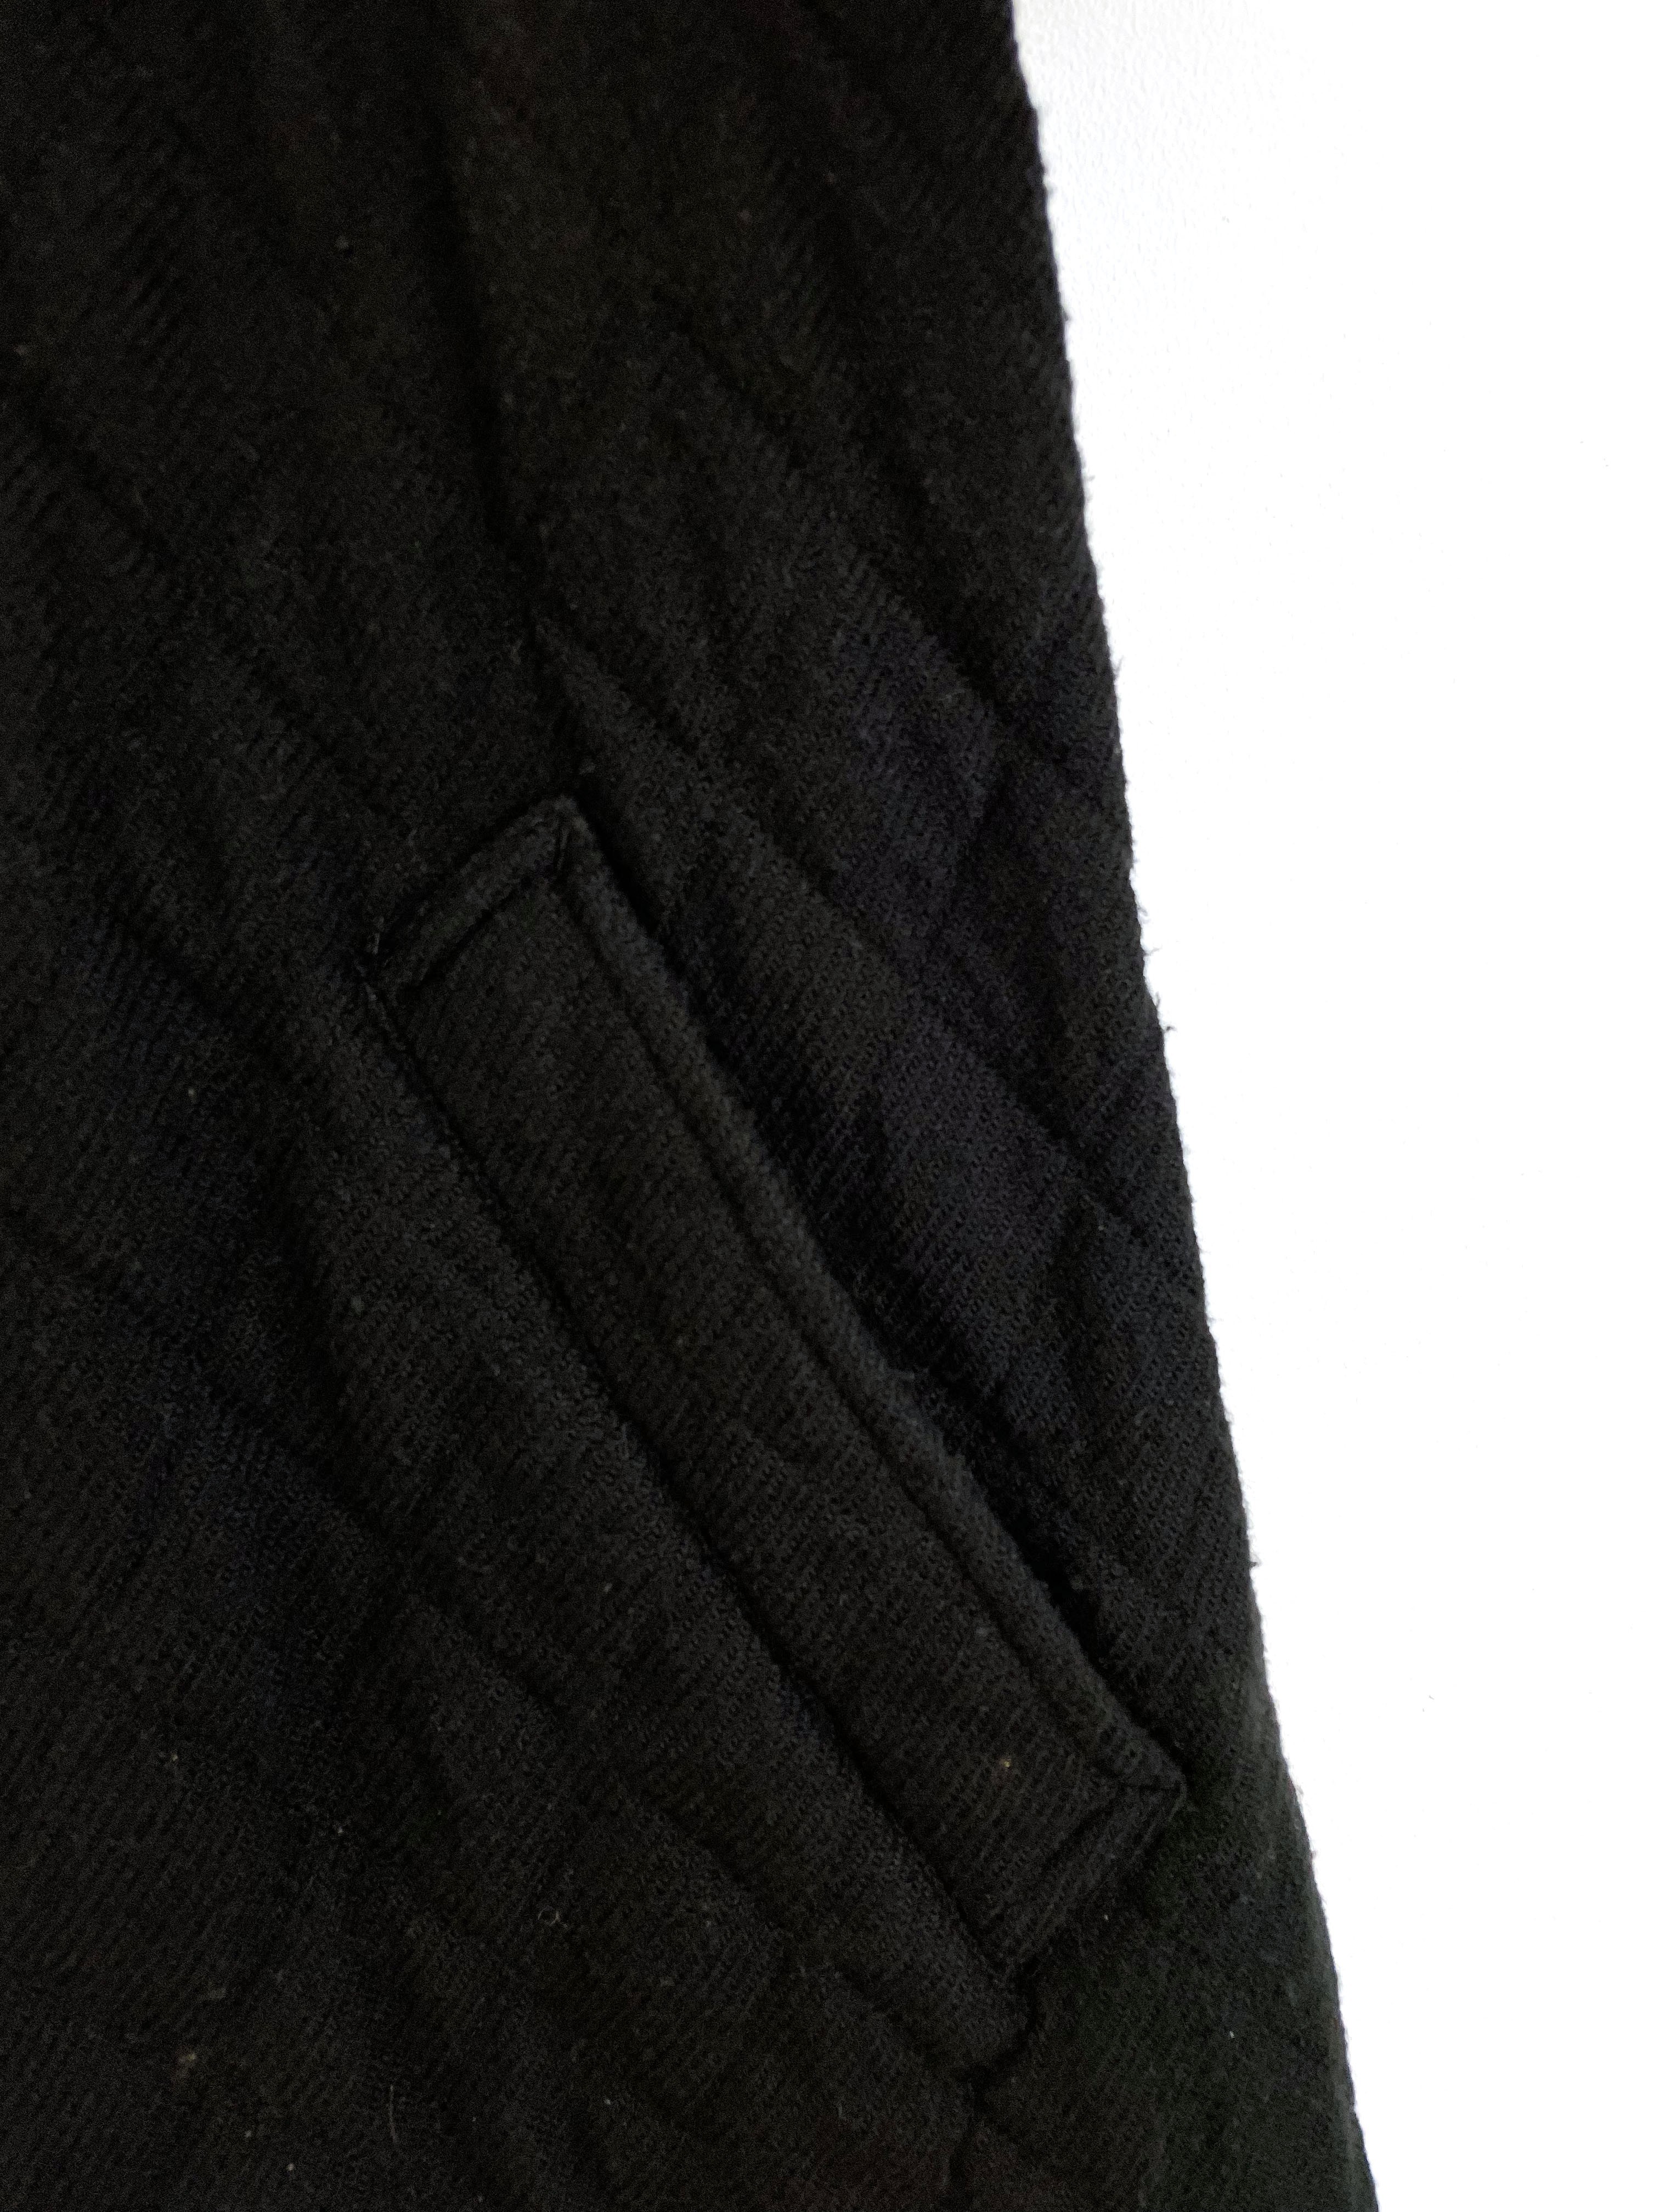 2007 Quilted Coat - 5